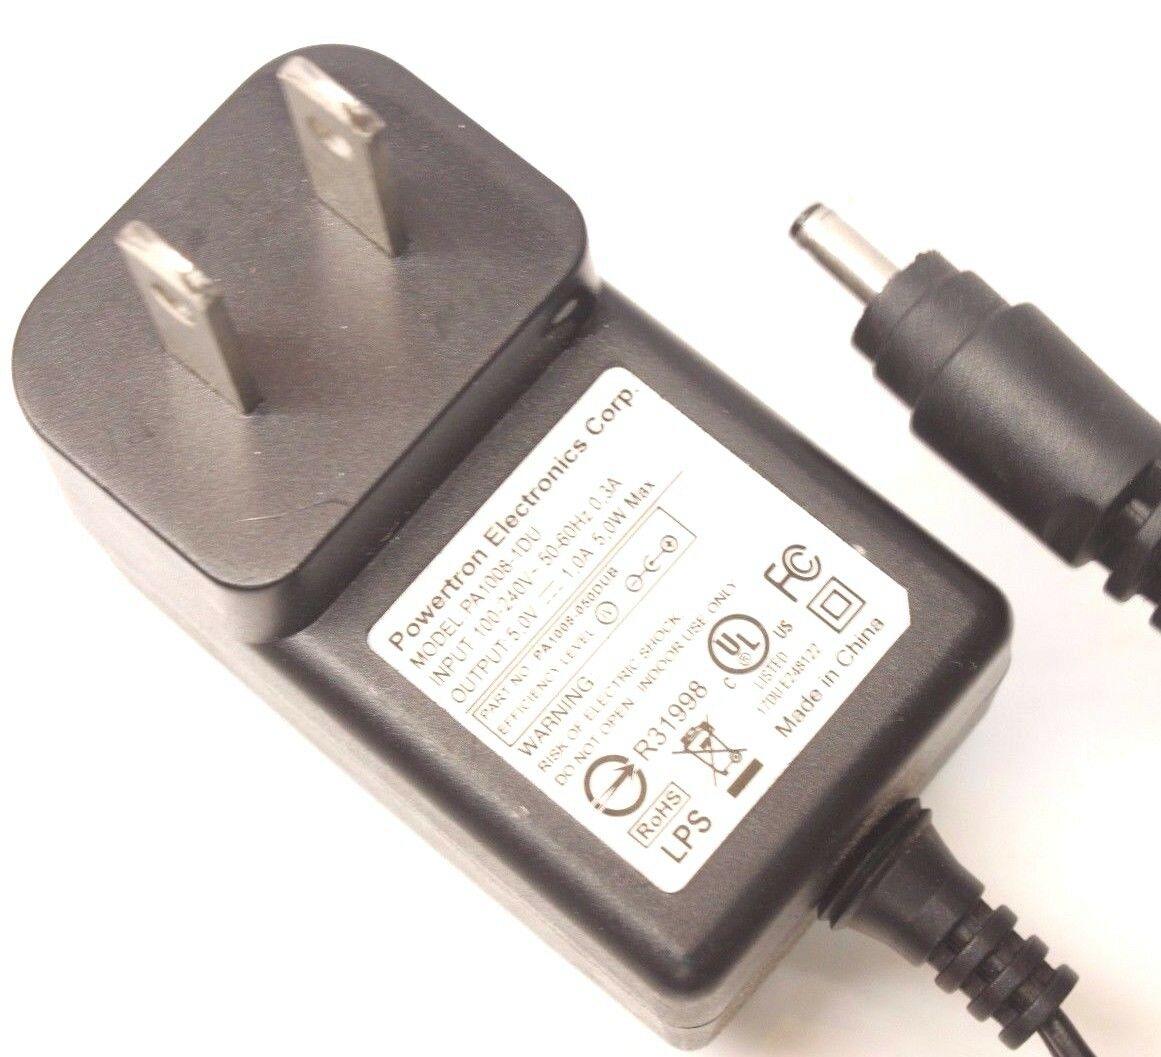 PA1008-1DU AC Power Supply Adapter Output 5V DC 1A for Rocketfish HDMI Switch Model Number PA1008-1DU Brand: PEC Type: - Click Image to Close